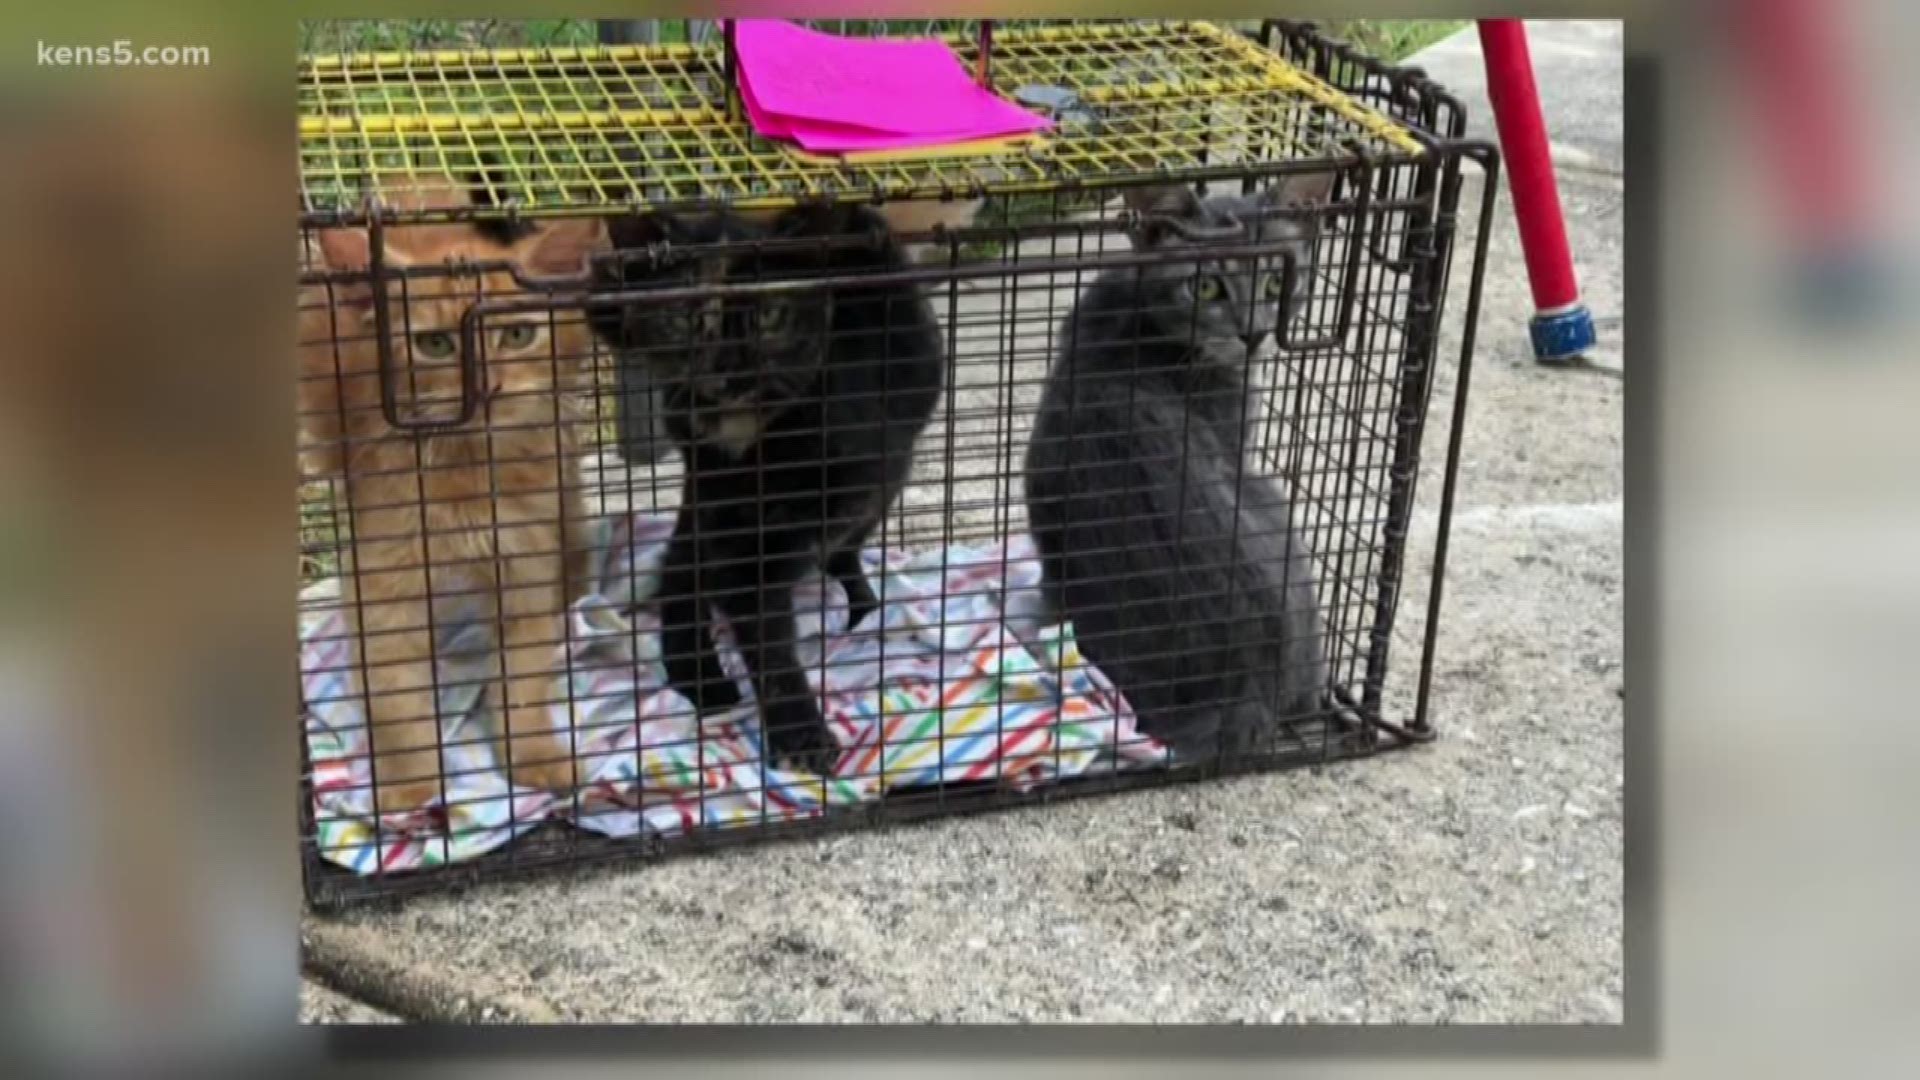 Among the rescued animals: 18 dogs, six cats, two turtles. Authorities say the property owner will face charges.